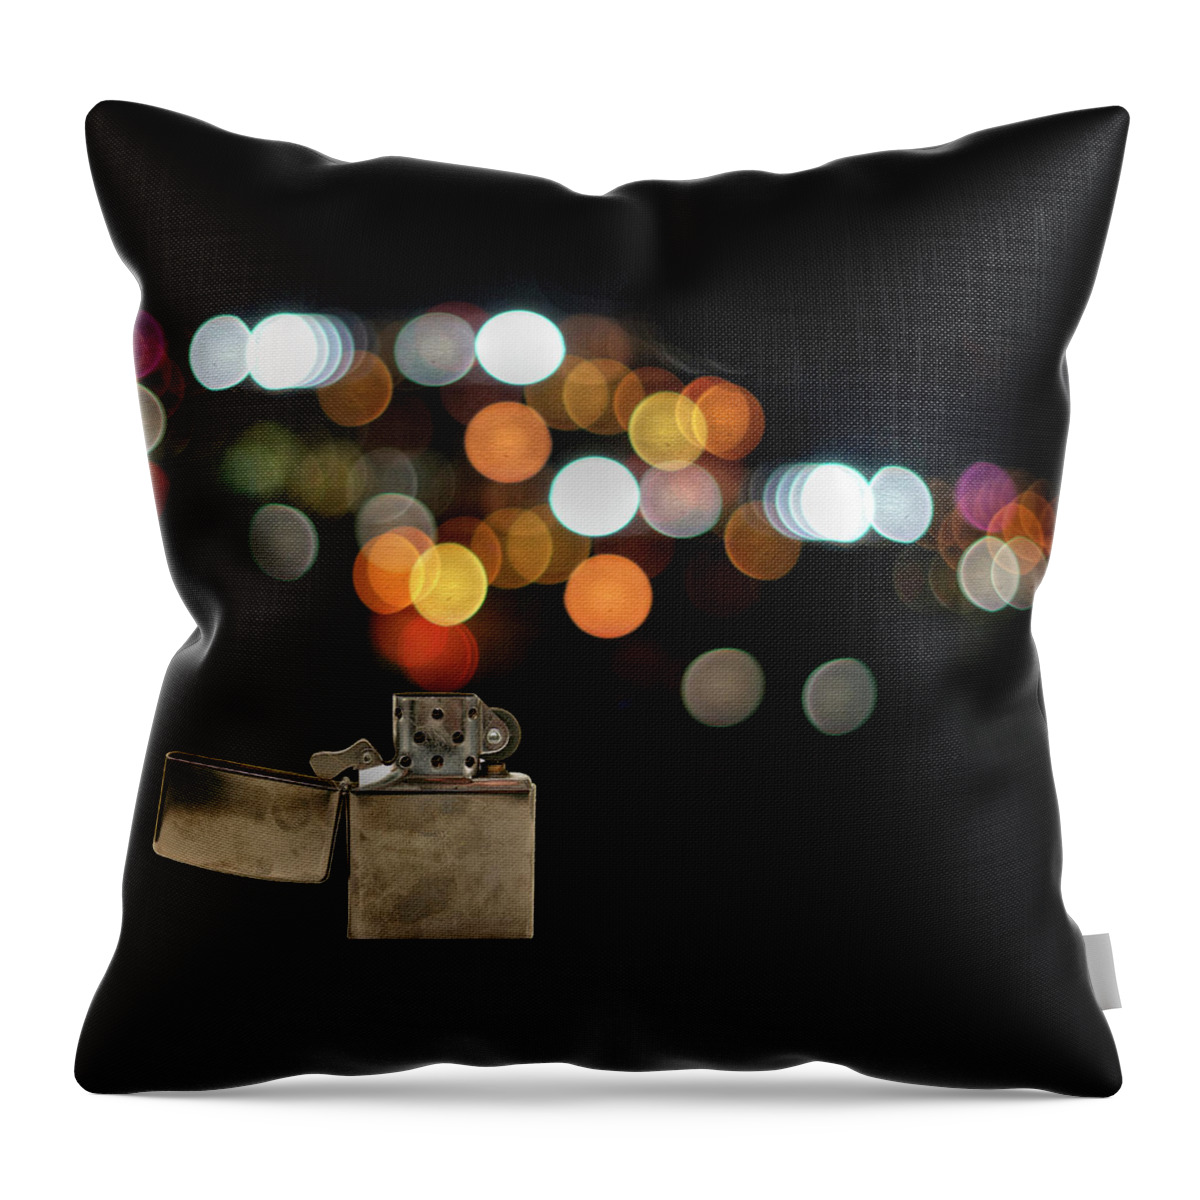 Cigarette Lighter Throw Pillow featuring the photograph Lighter And Bokeh by Image By Darren Nunis